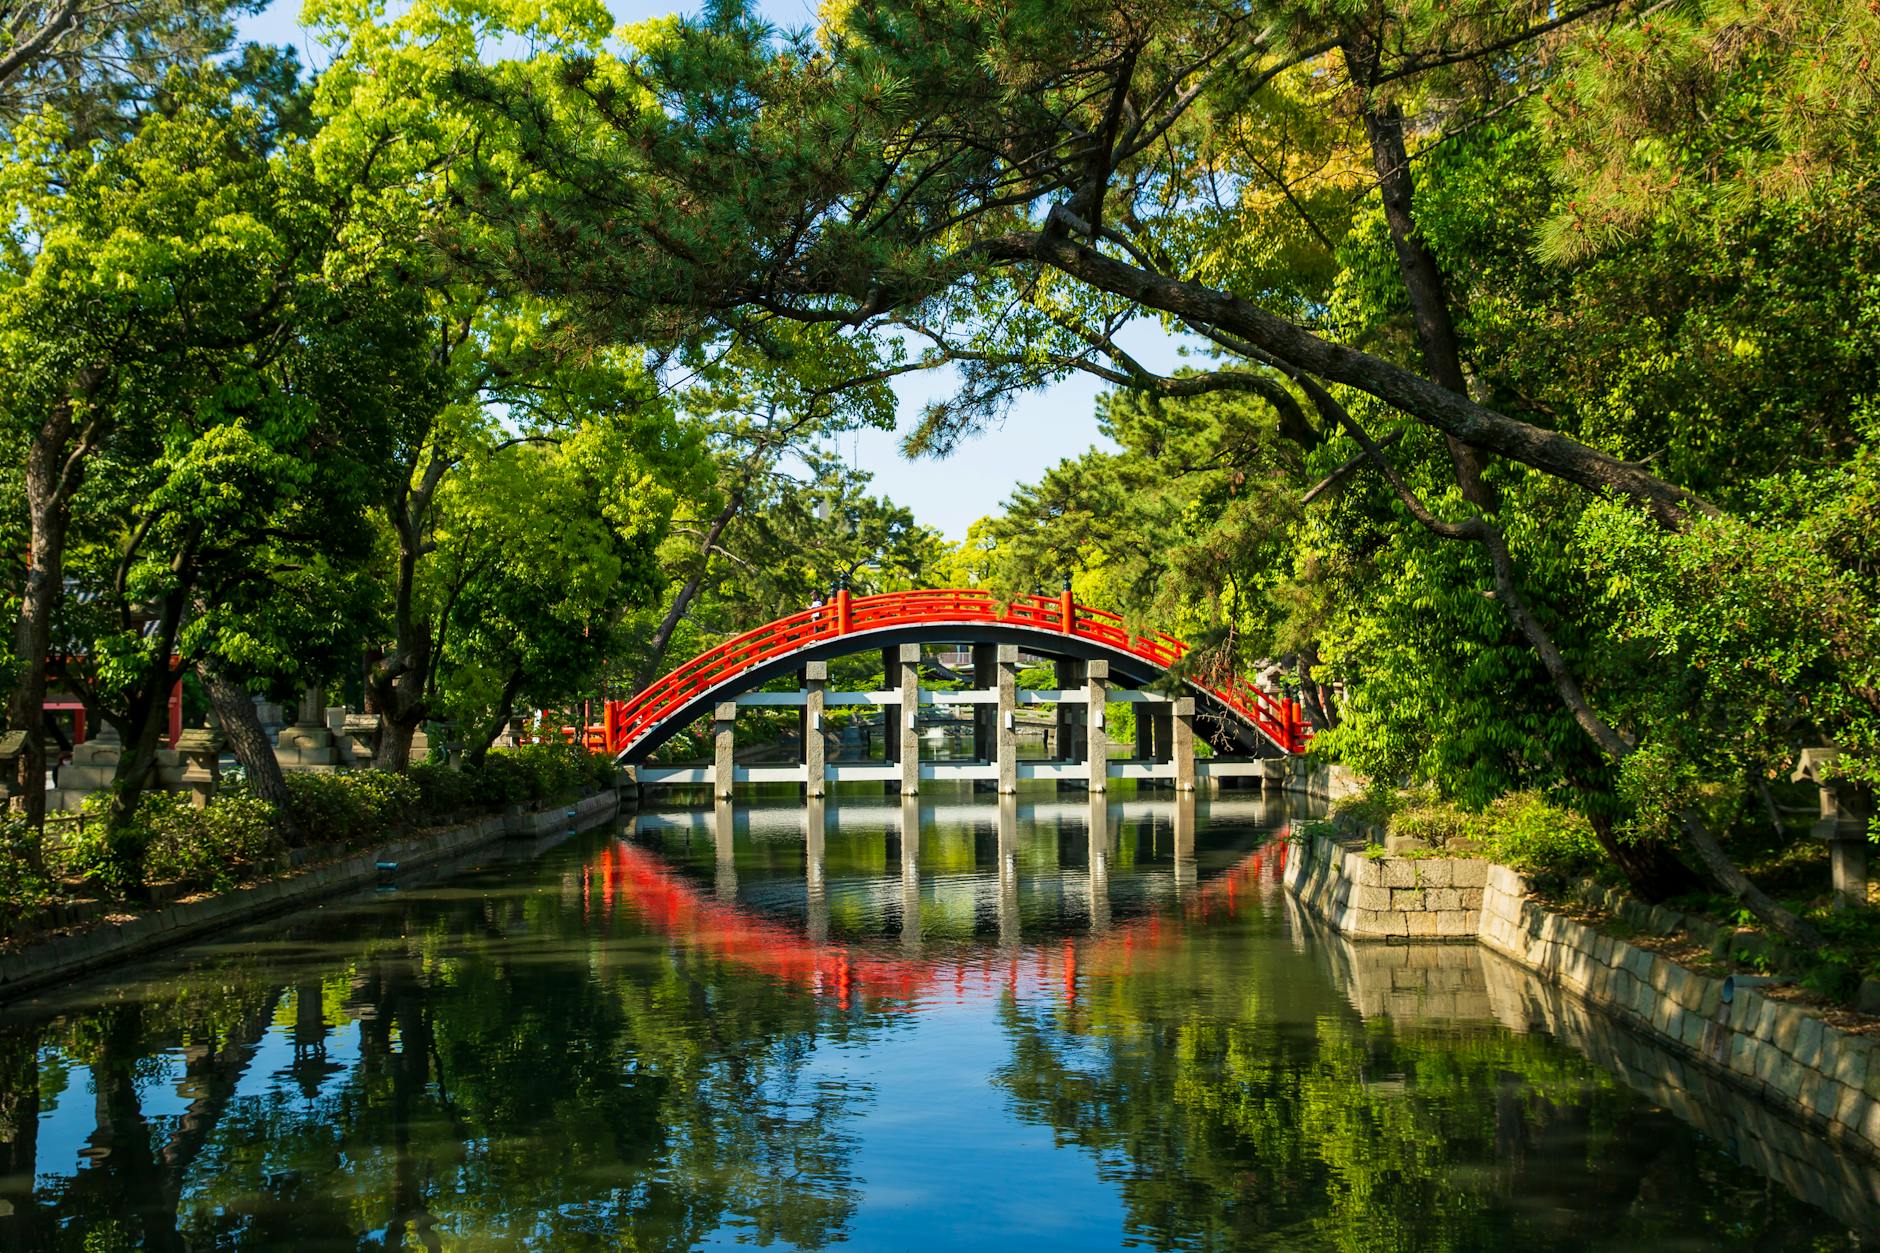 aged red bridge above water channel near trees in park